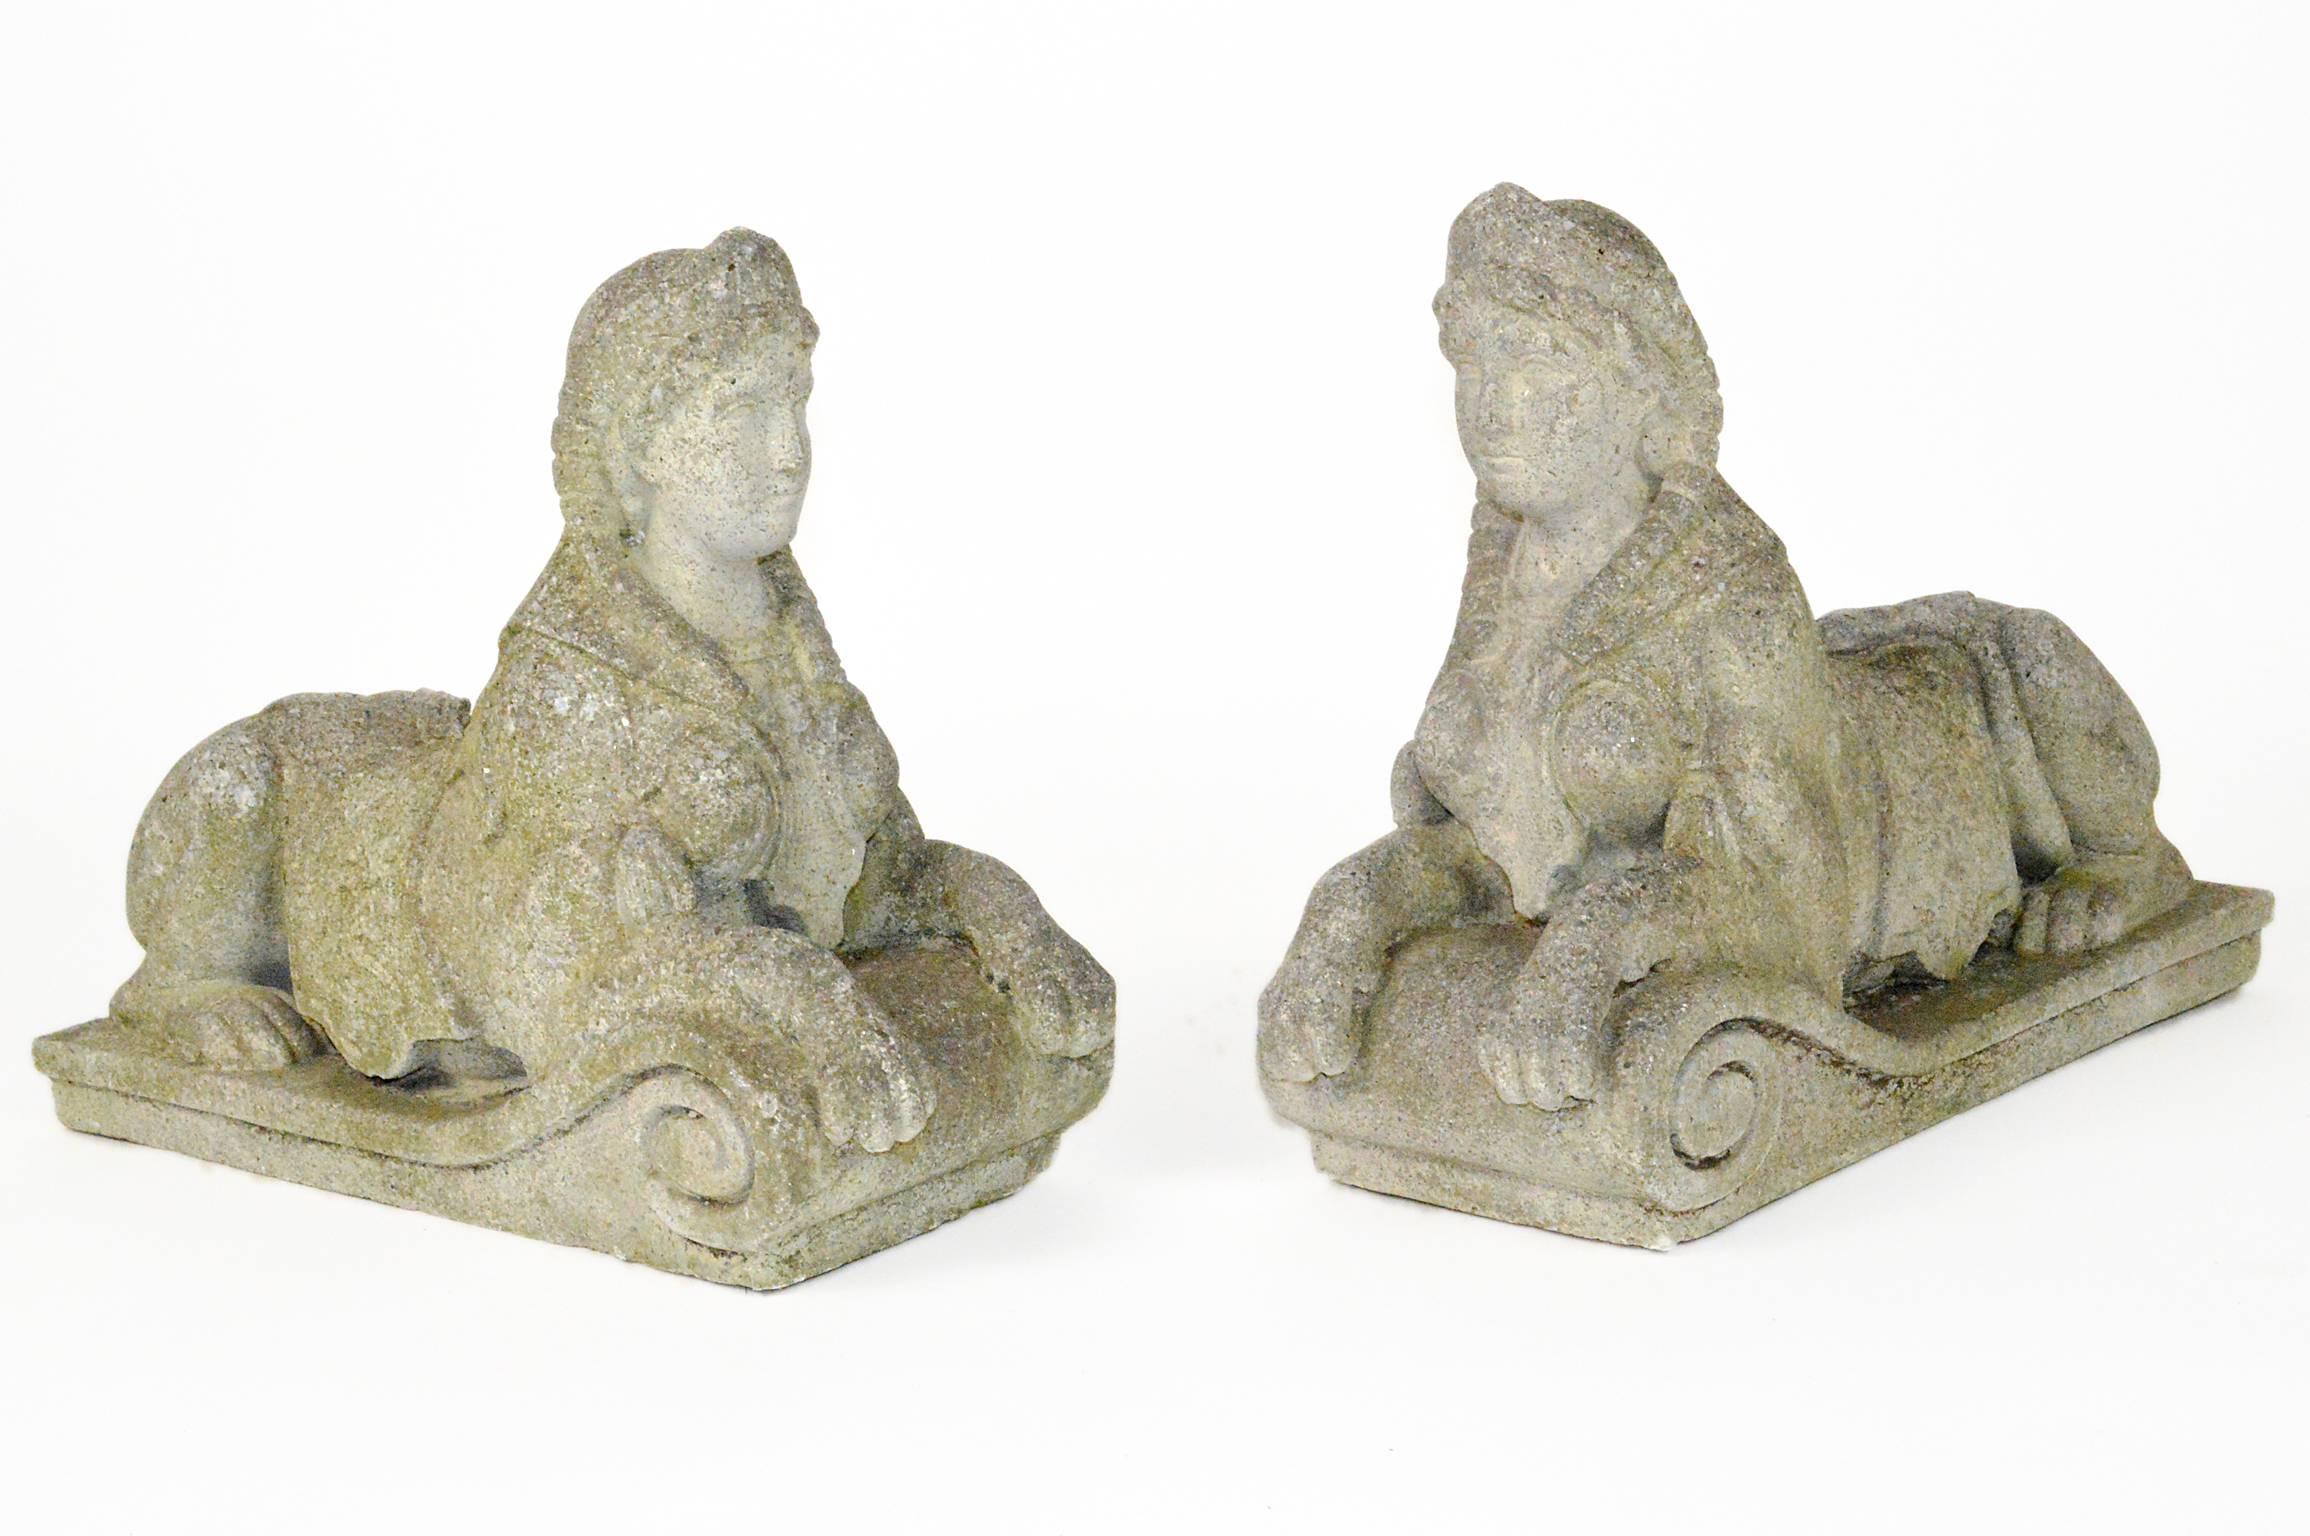 Pair of Egyptian Revival finely carved stone garden sphinx with nice antique weathered finish.